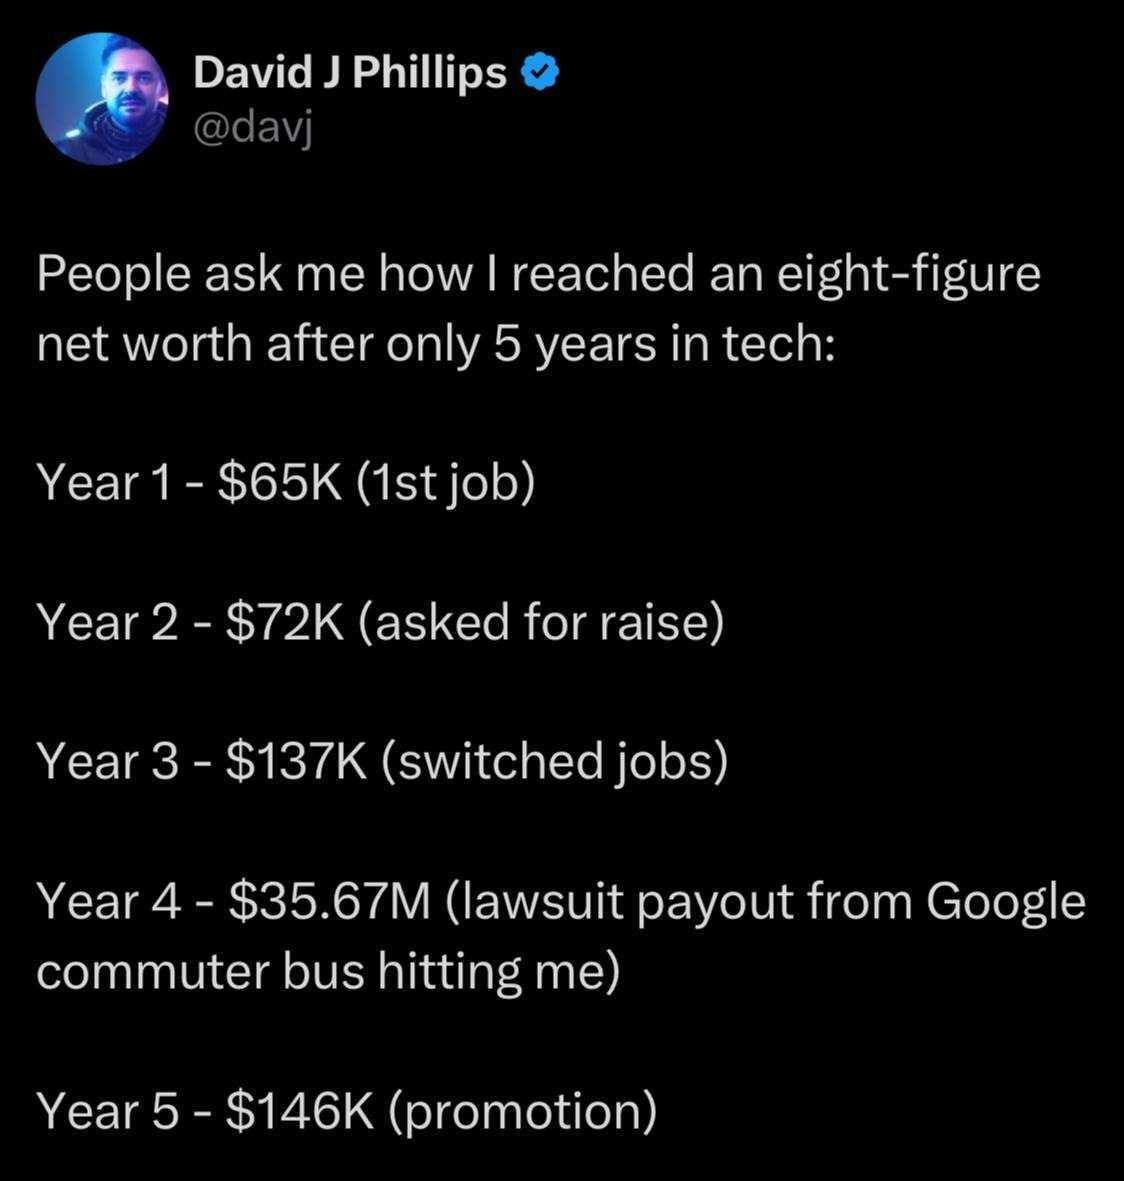 Net worth after only 5 years in tech